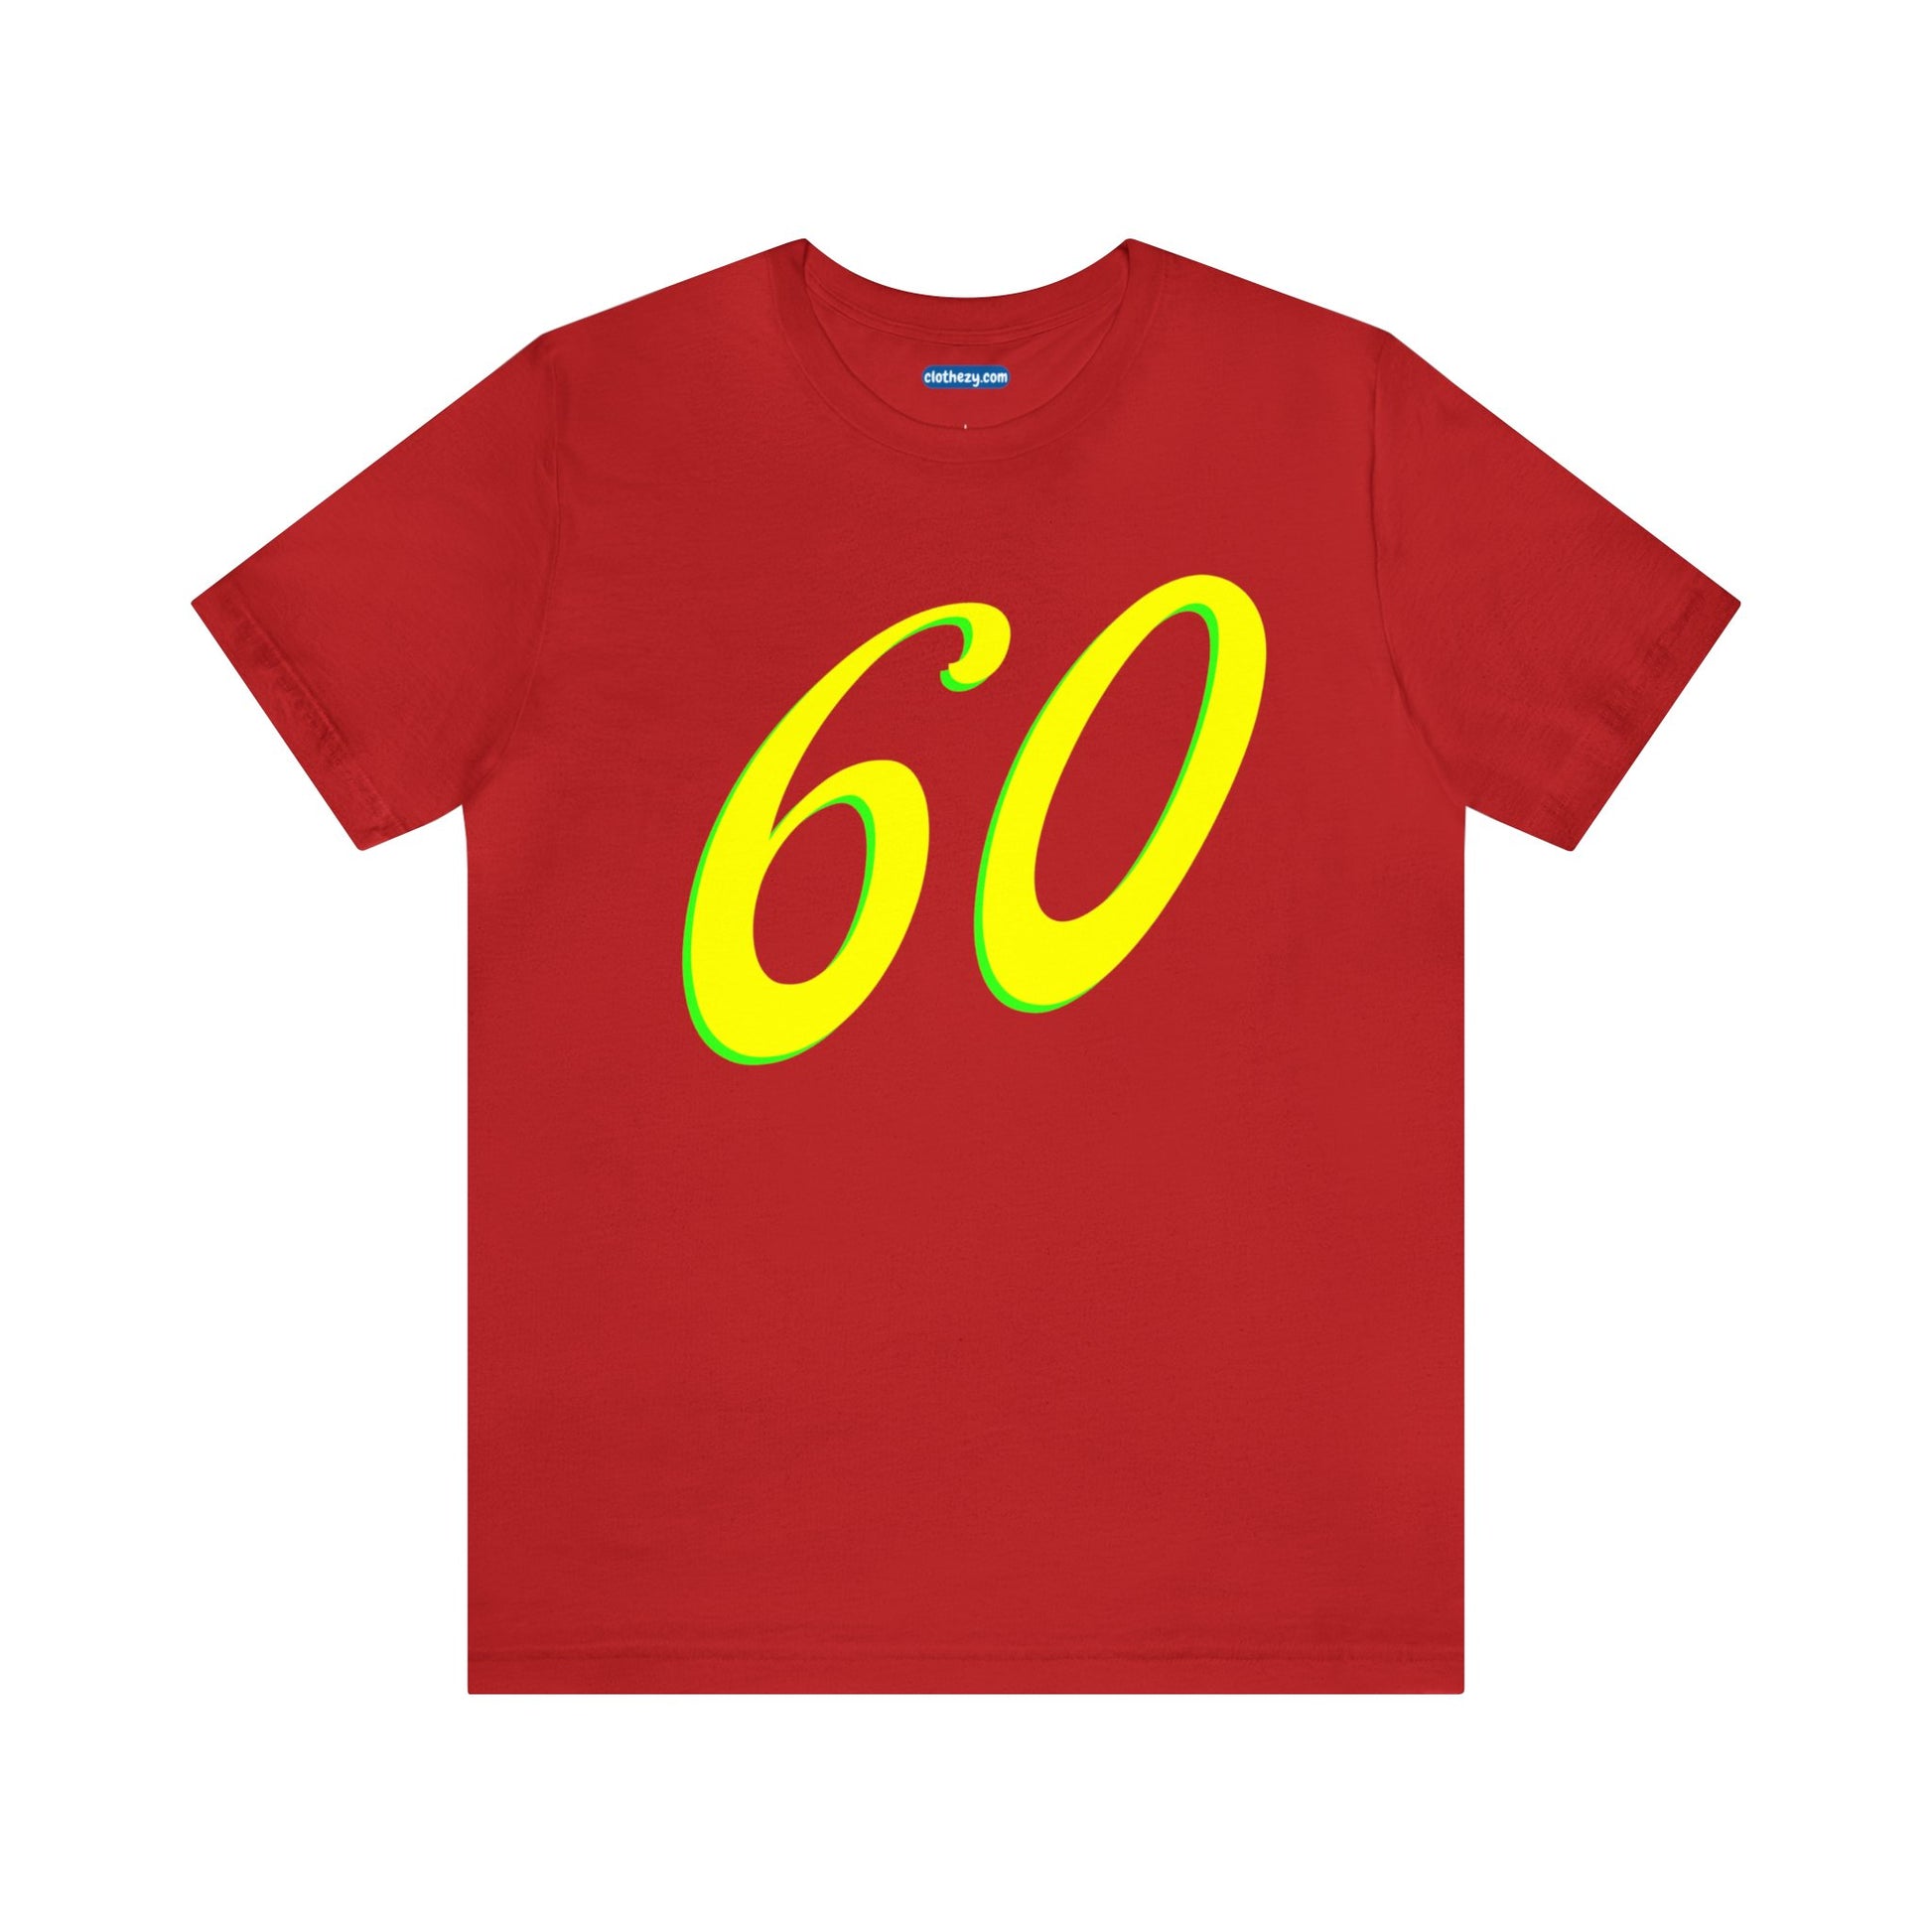 Number 60 Design - Soft Cotton Tee for birthdays and celebrations, Gift for friends and family, Multiple Options by clothezy.com in Red Size Small - Buy Now